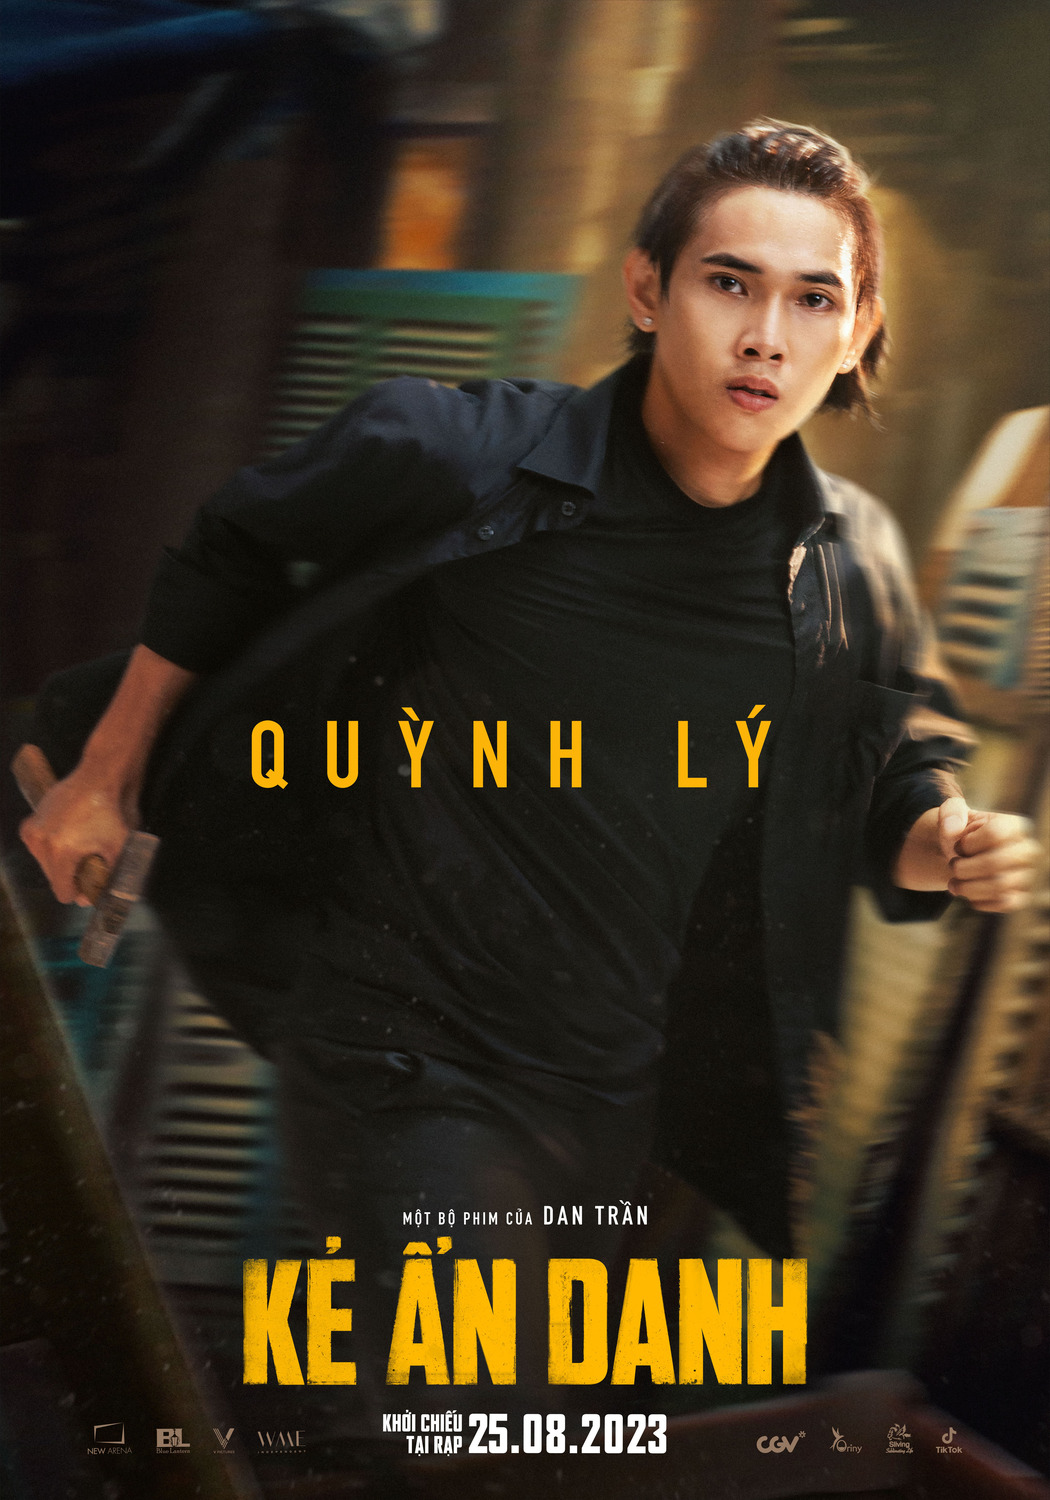 Extra Large Movie Poster Image for Kẻ Ẩn Danh (#10 of 13)